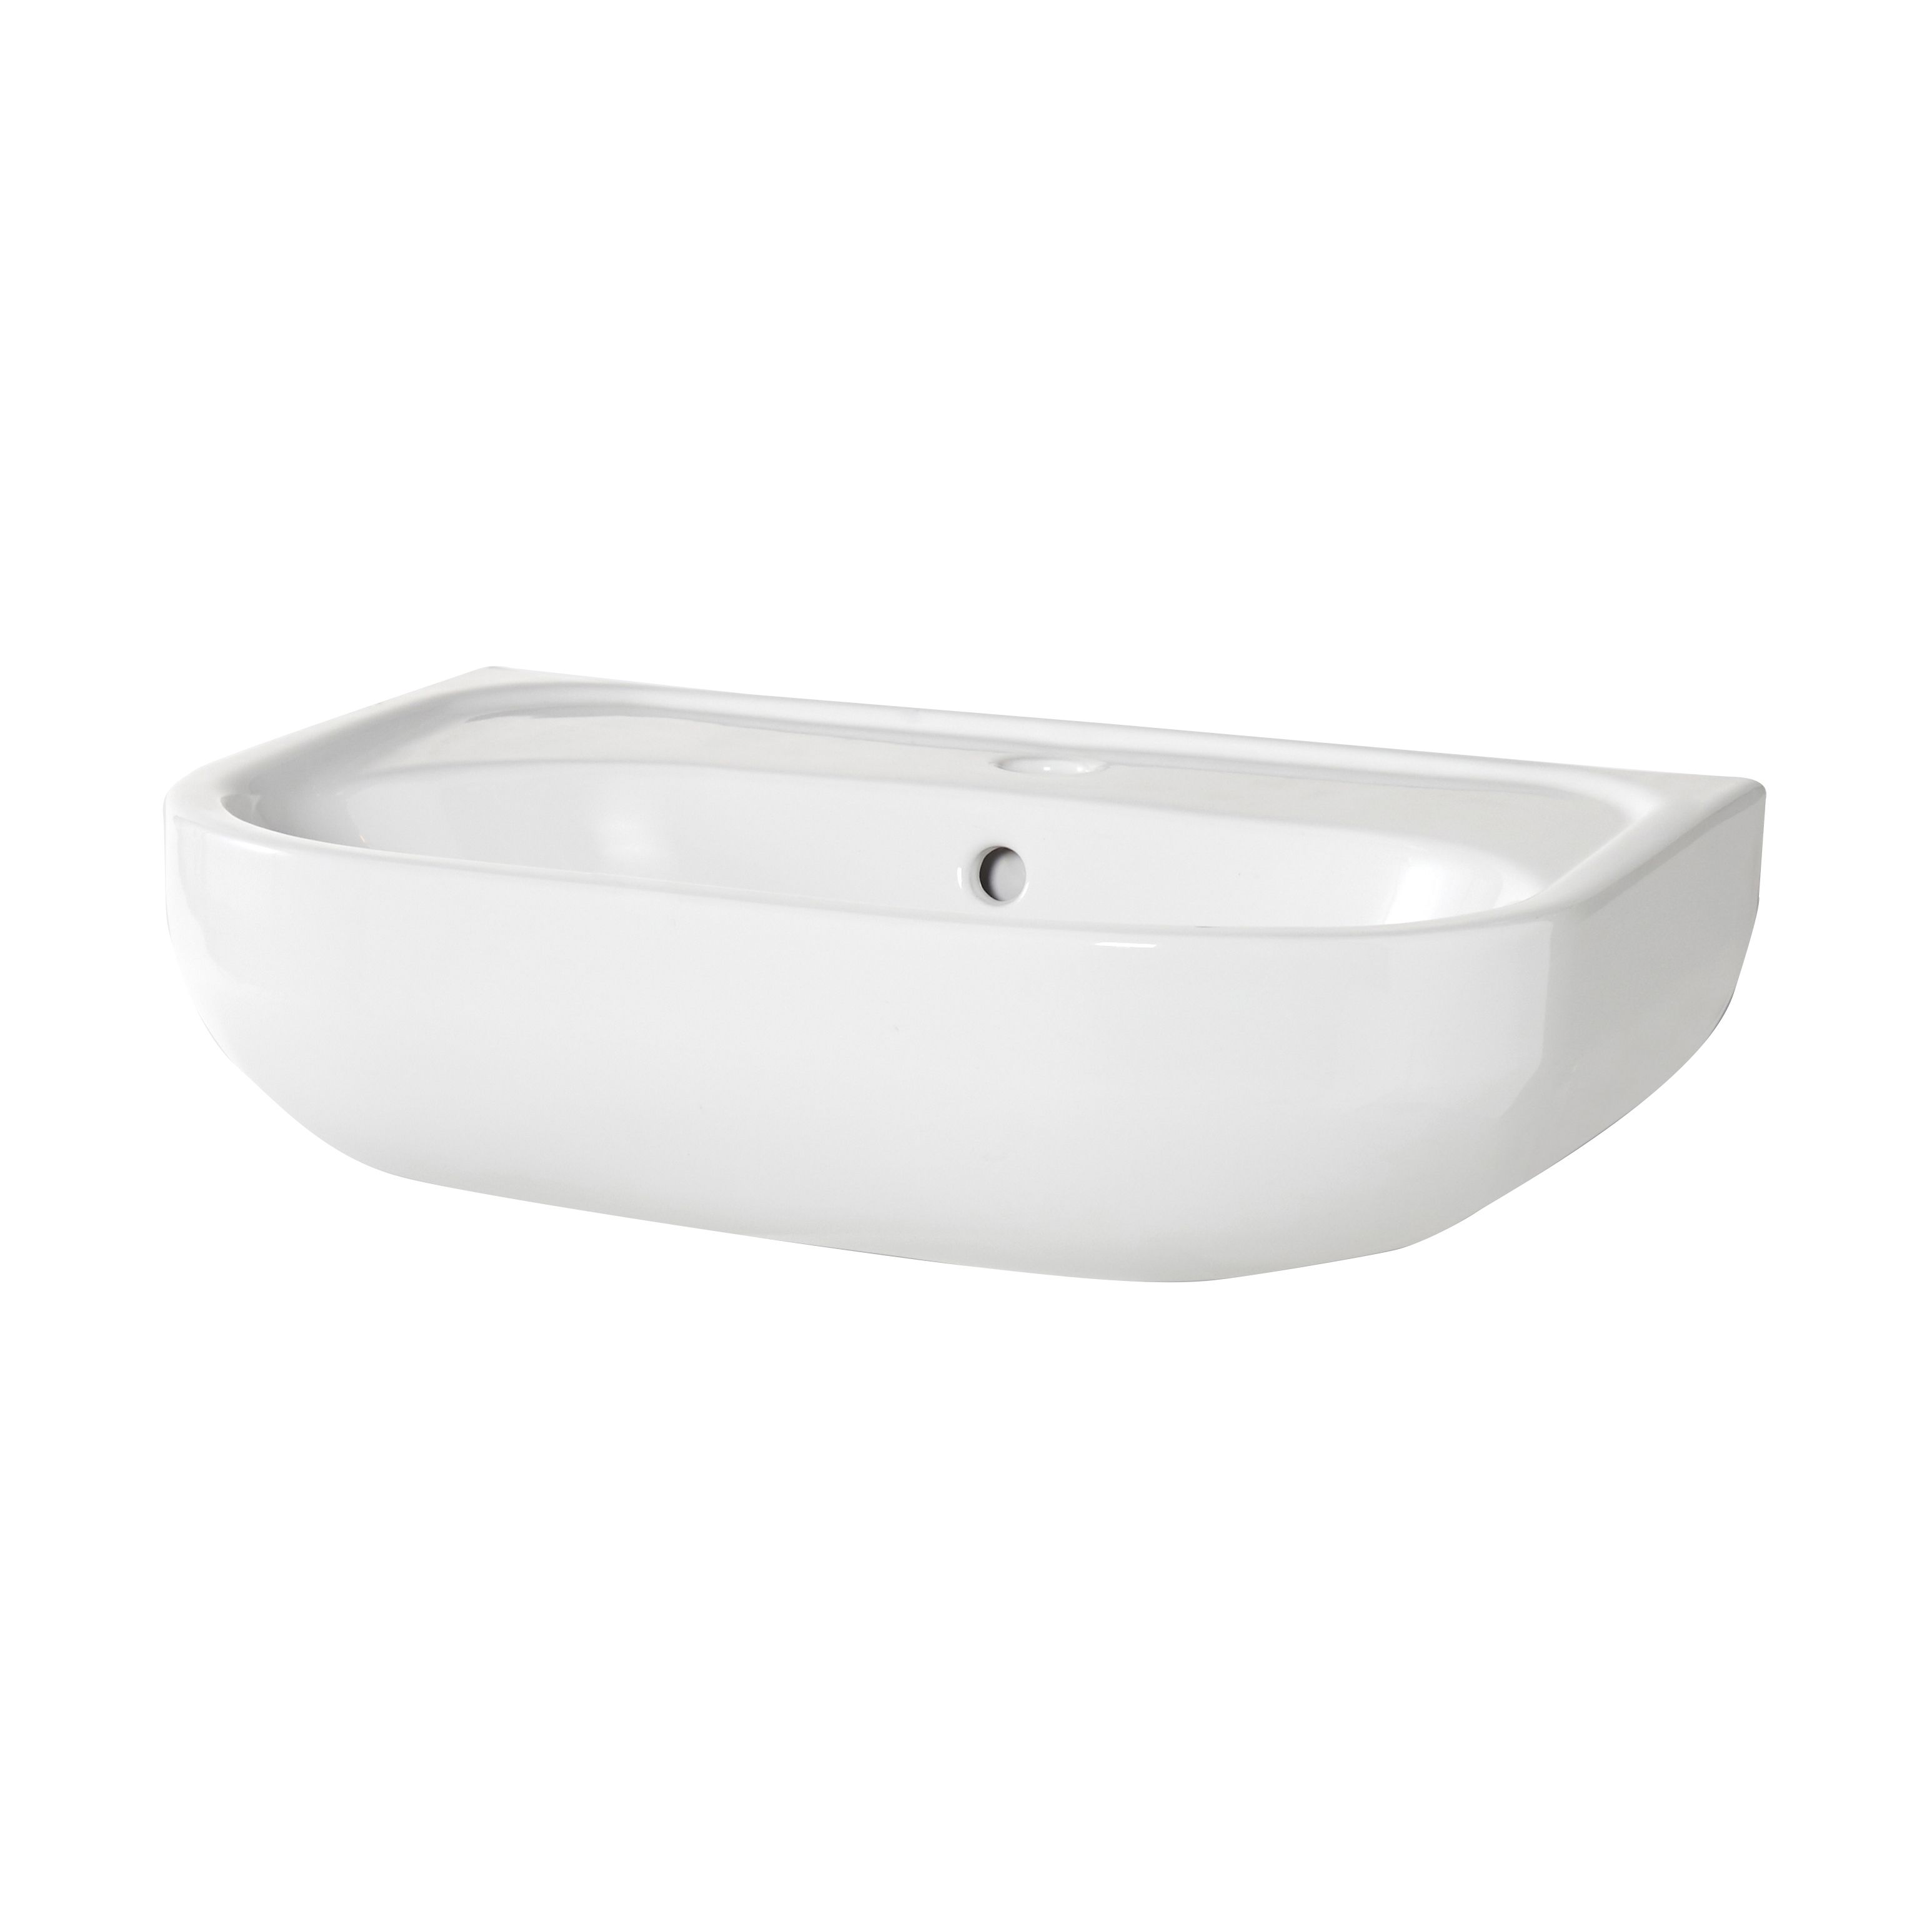 GoodHome Cavally compact White Close-coupled Floor-mounted Toilet & full pedestal basin